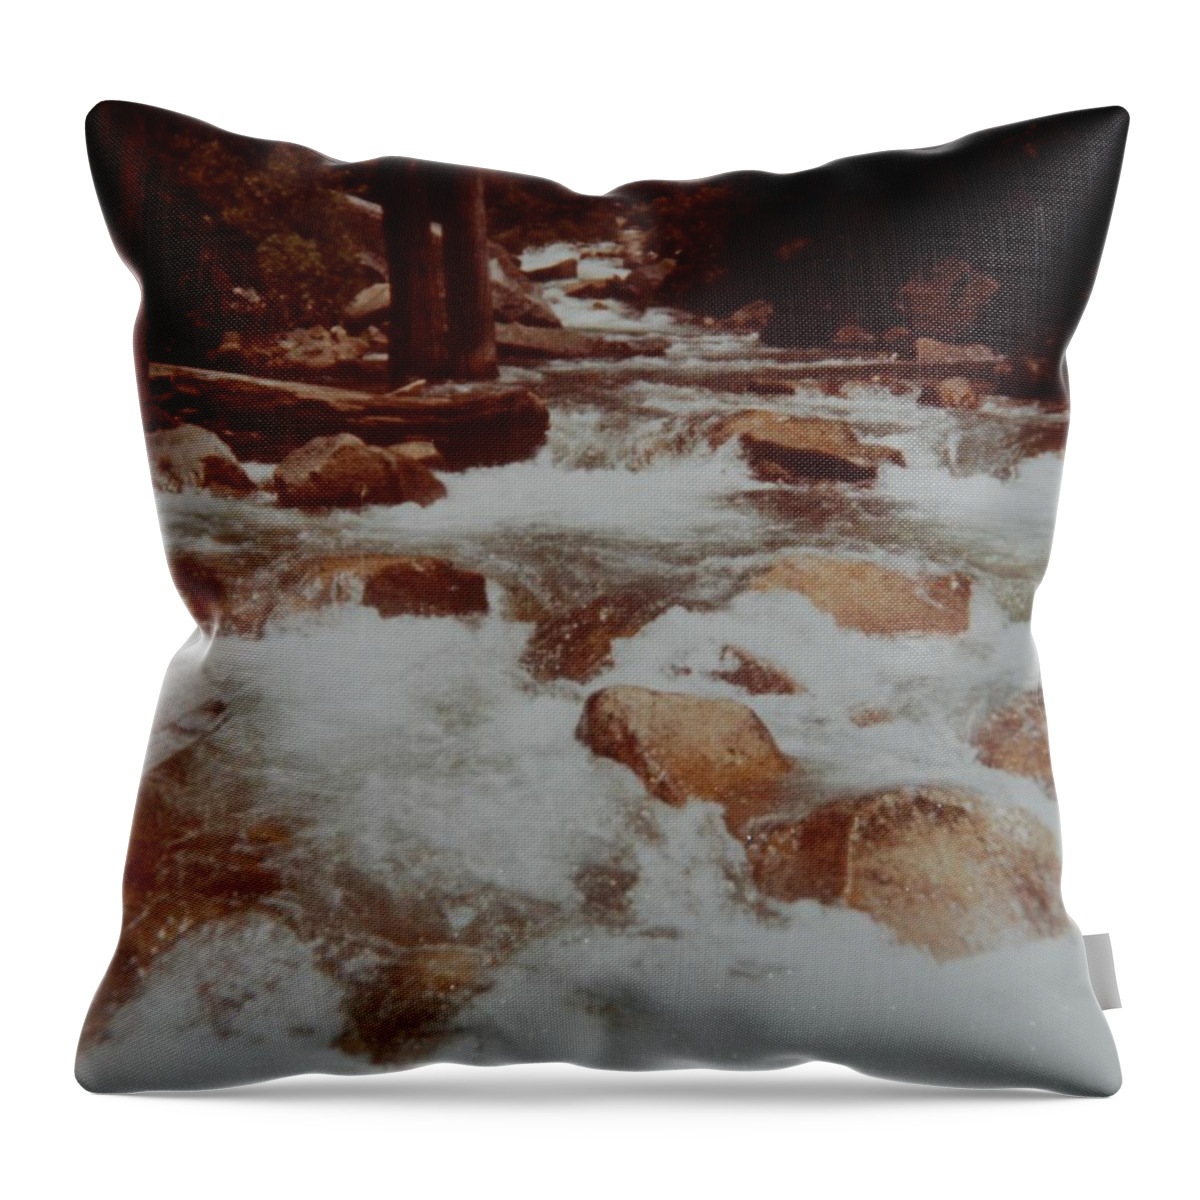 Water Throw Pillow featuring the photograph Rushing Water by Rob Hans